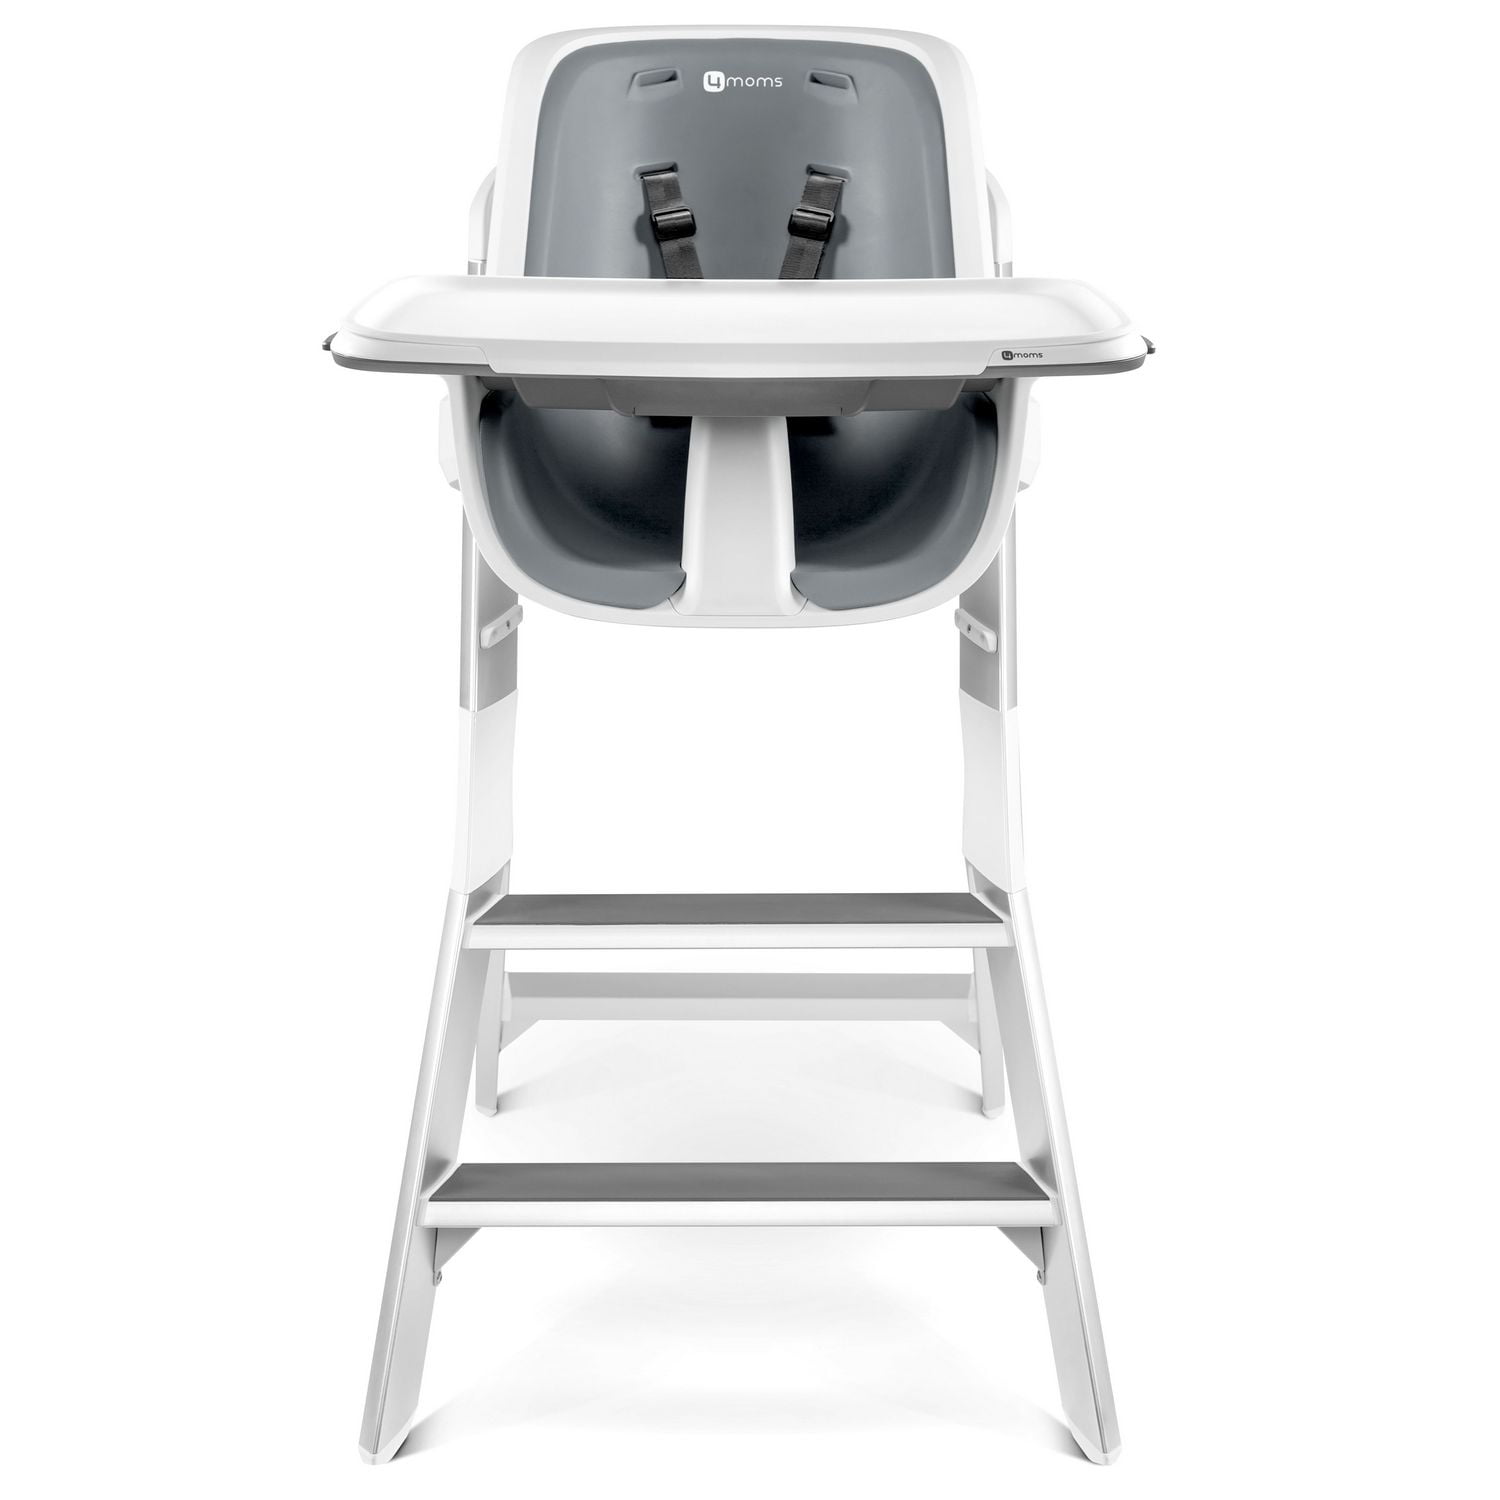 4Moms Magnetic Tray Top Adjustable Height Kids Highchair High Chair White/Grey 